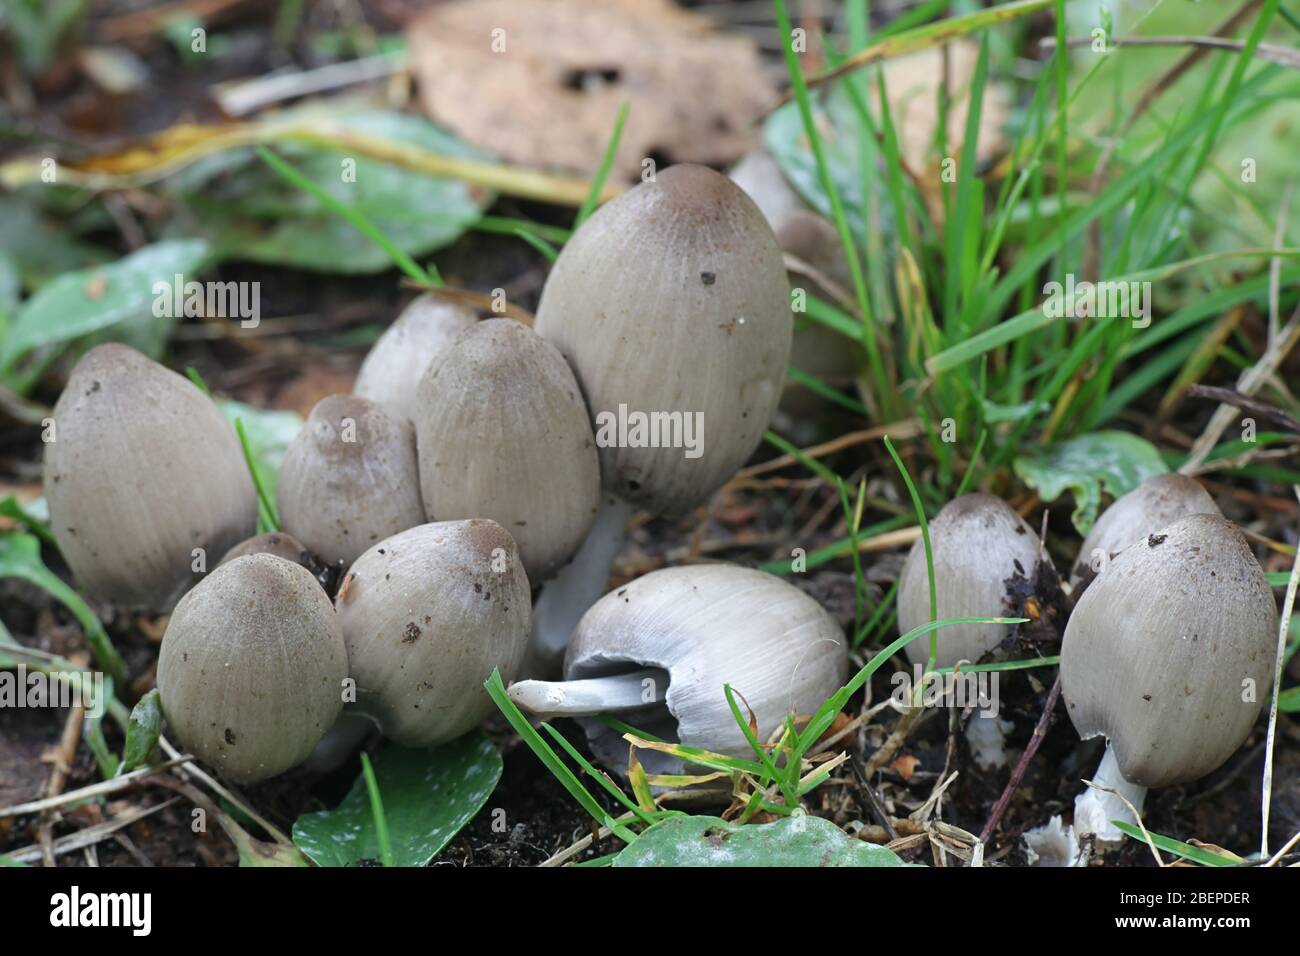 Coprinopsis atramentaria, known as the common ink cap, common inky cap or tippler's bane, wild mushroom from Finland Stock Photo